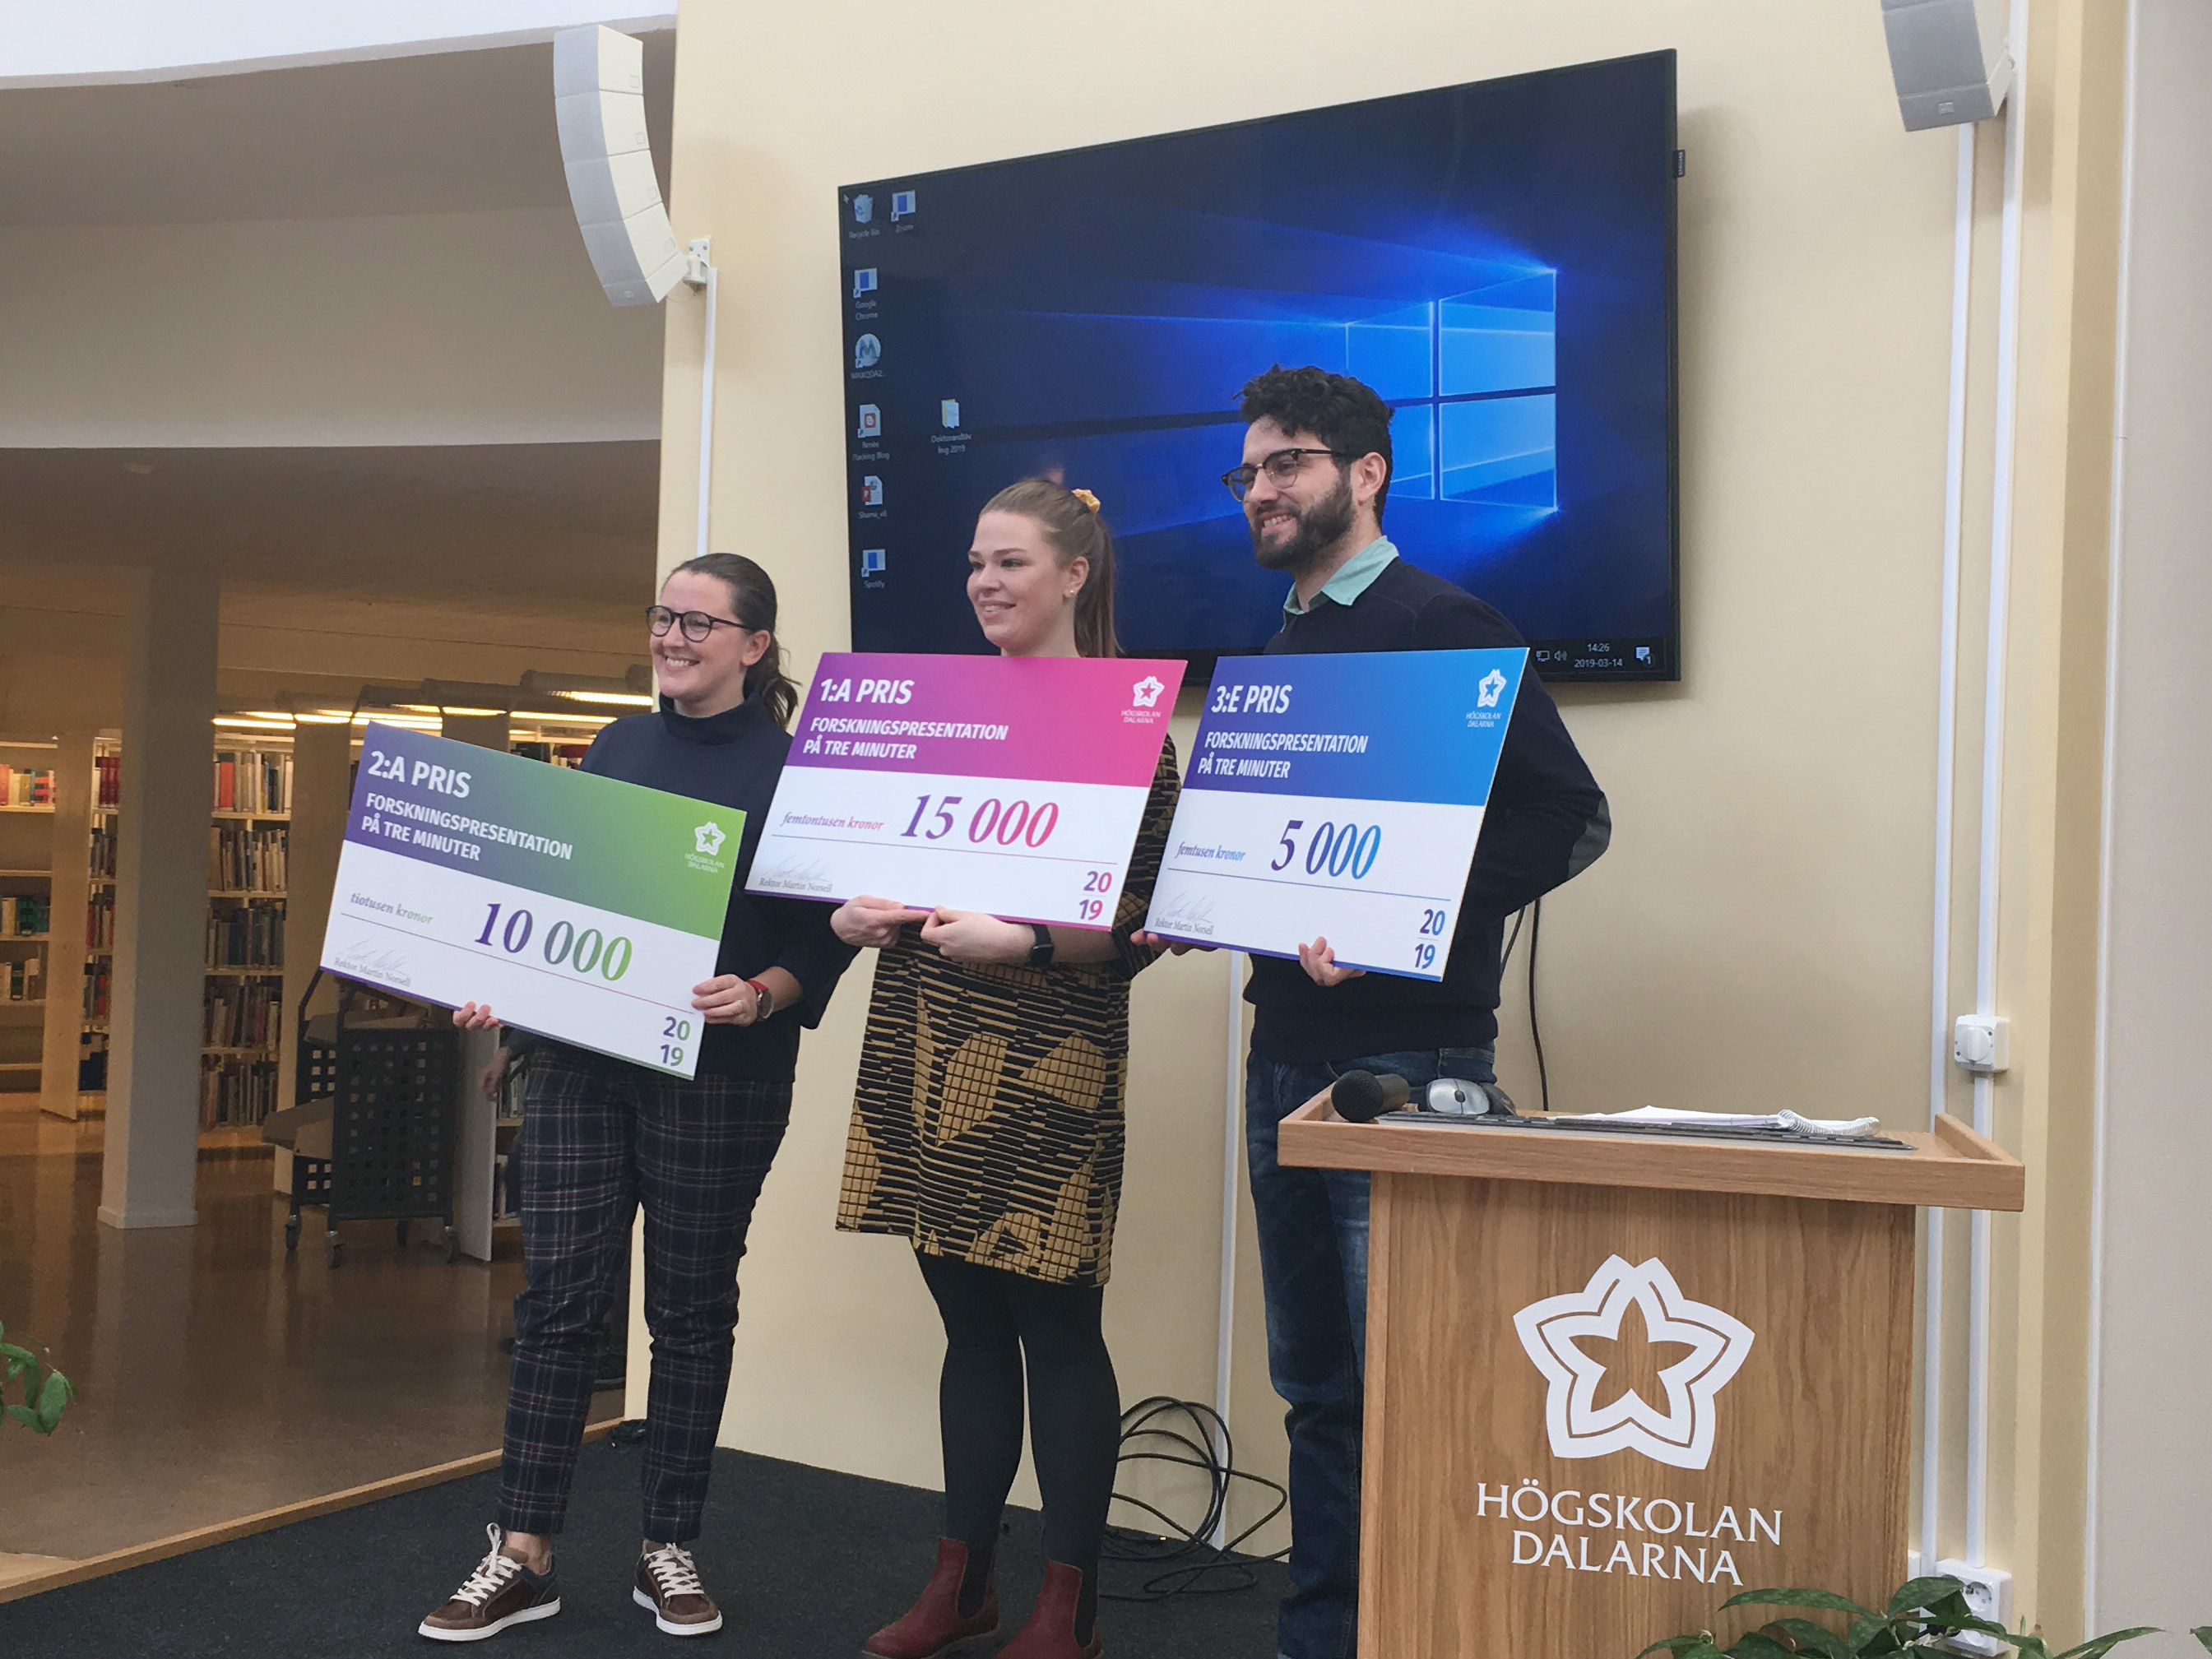 The winners at the Campus Borlänge Library 